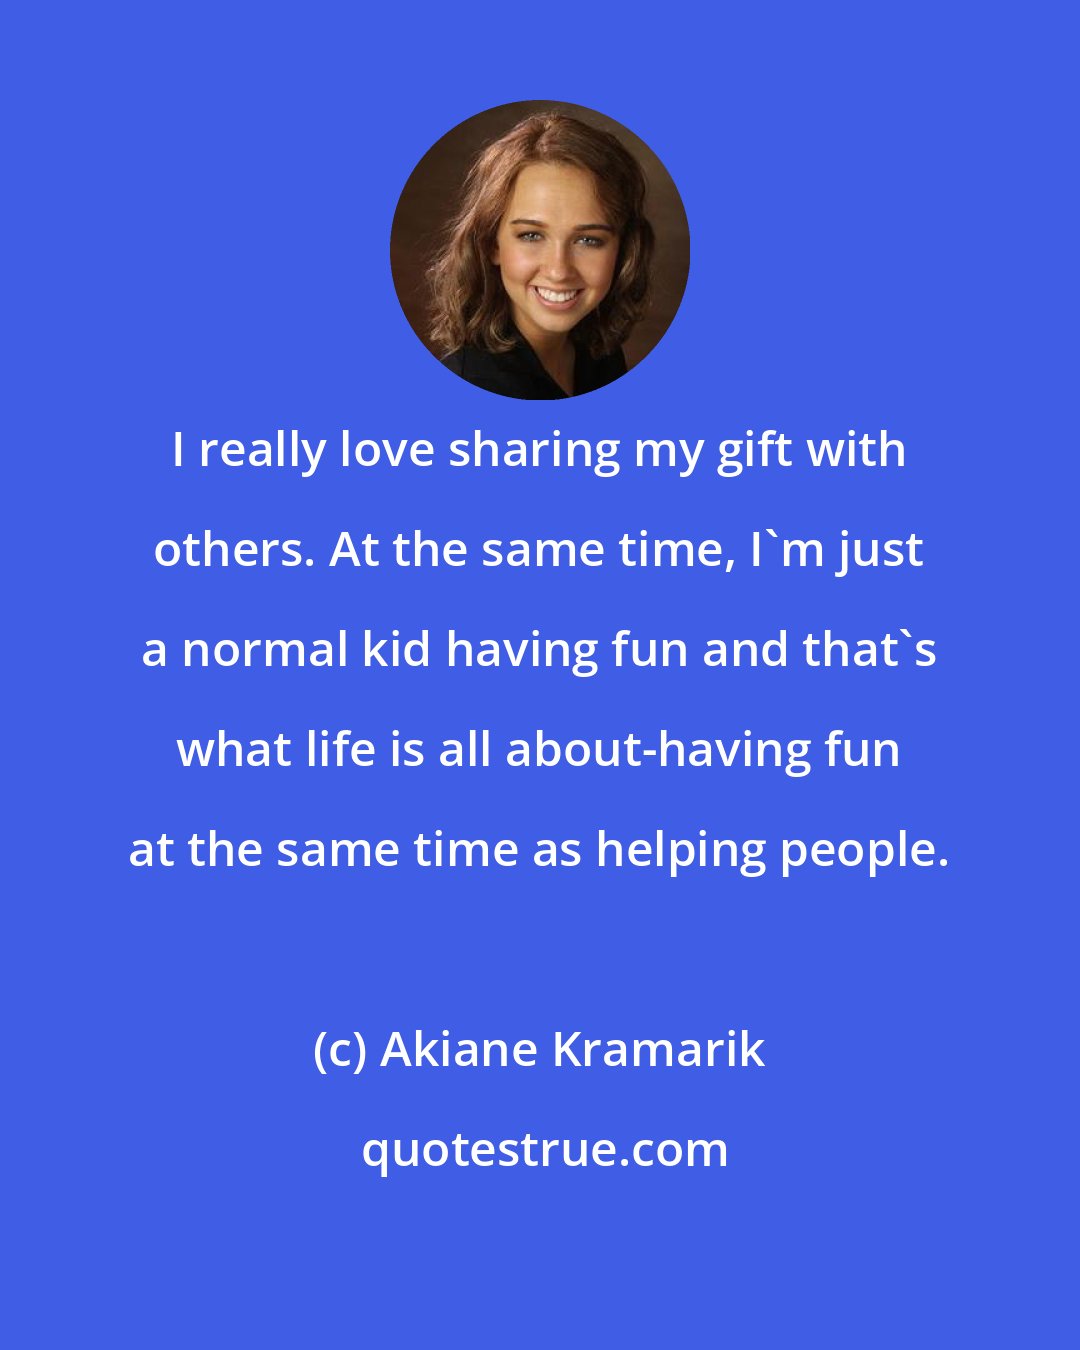 Akiane Kramarik: I really love sharing my gift with others. At the same time, I'm just a normal kid having fun and that's what life is all about-having fun at the same time as helping people.